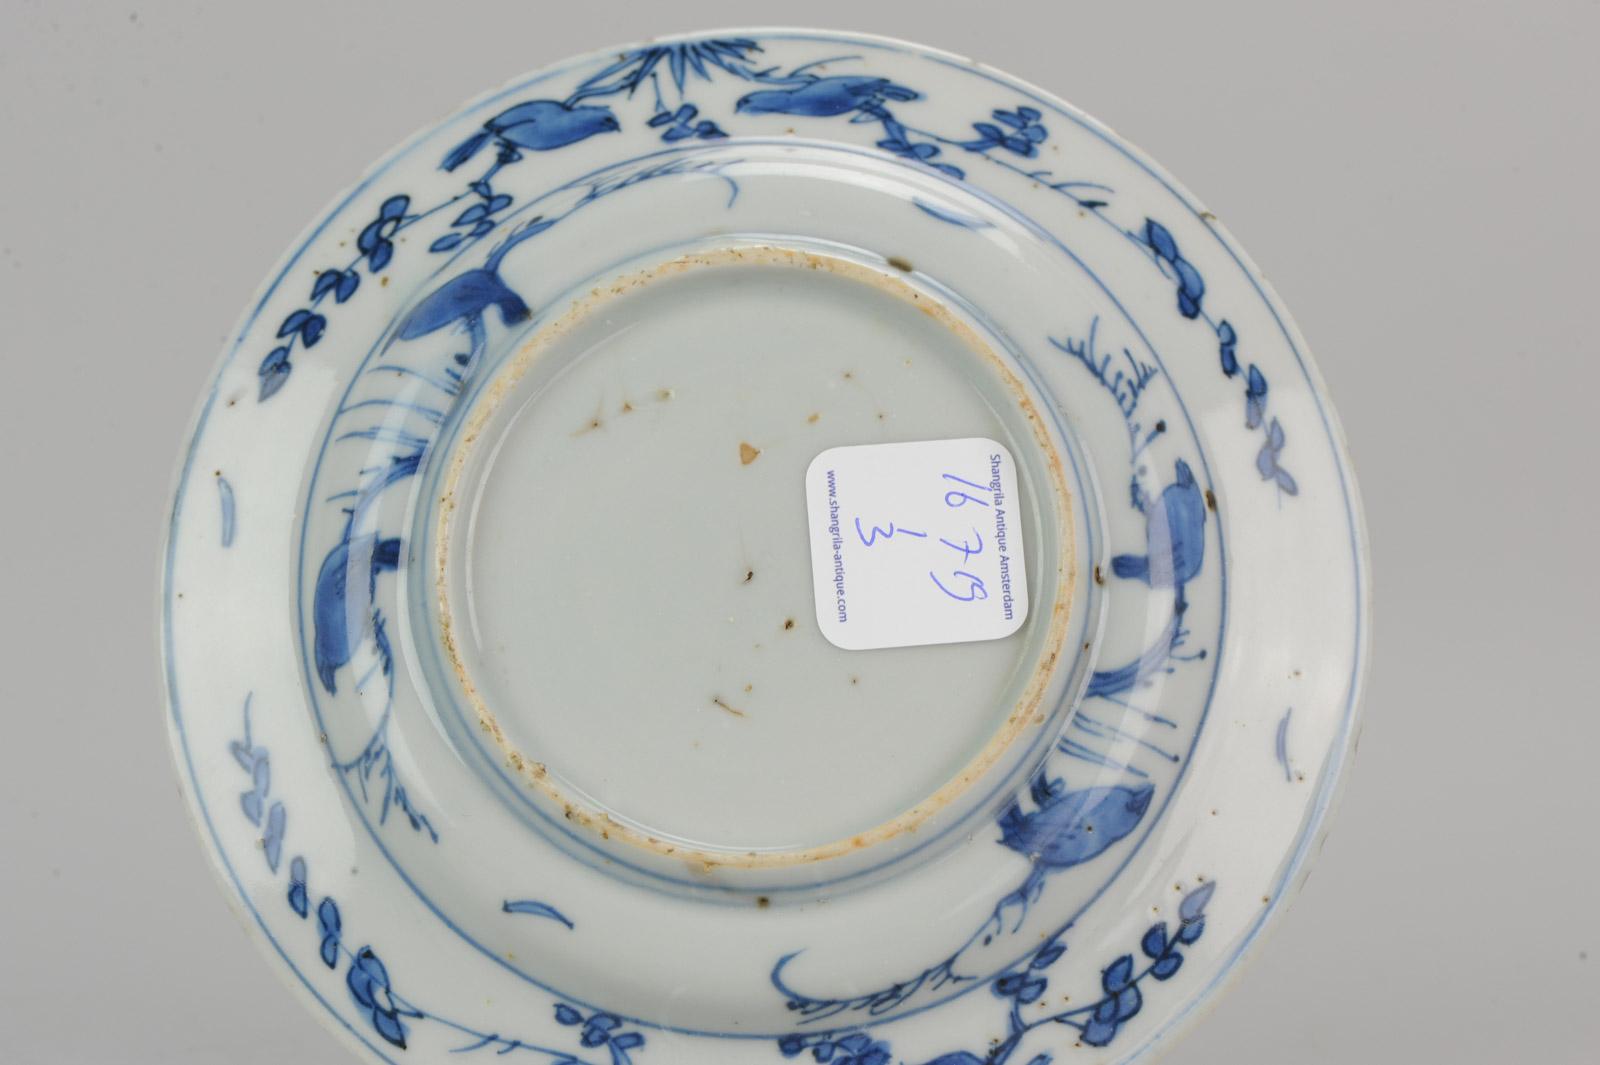 Antique Chinese Porcelain Ming 1540-1580 Jiajing Wanli Landscape Plate with Bird For Sale 1